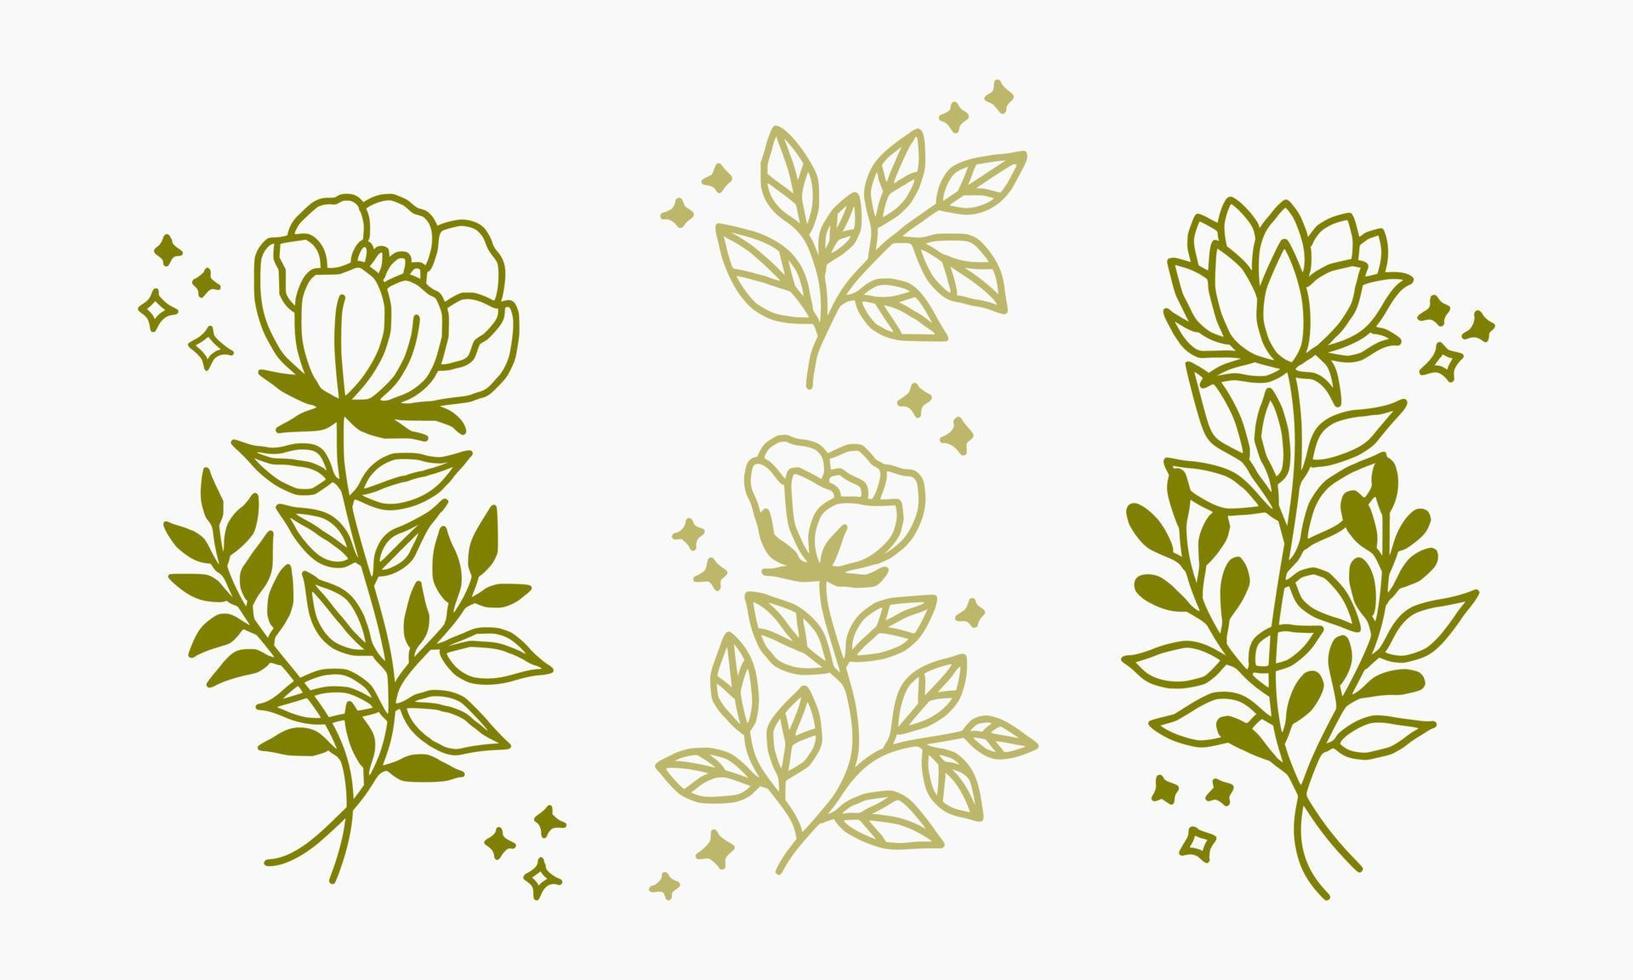 Set of hand drawn vintage linear flower and plant elements for logo or decoration vector